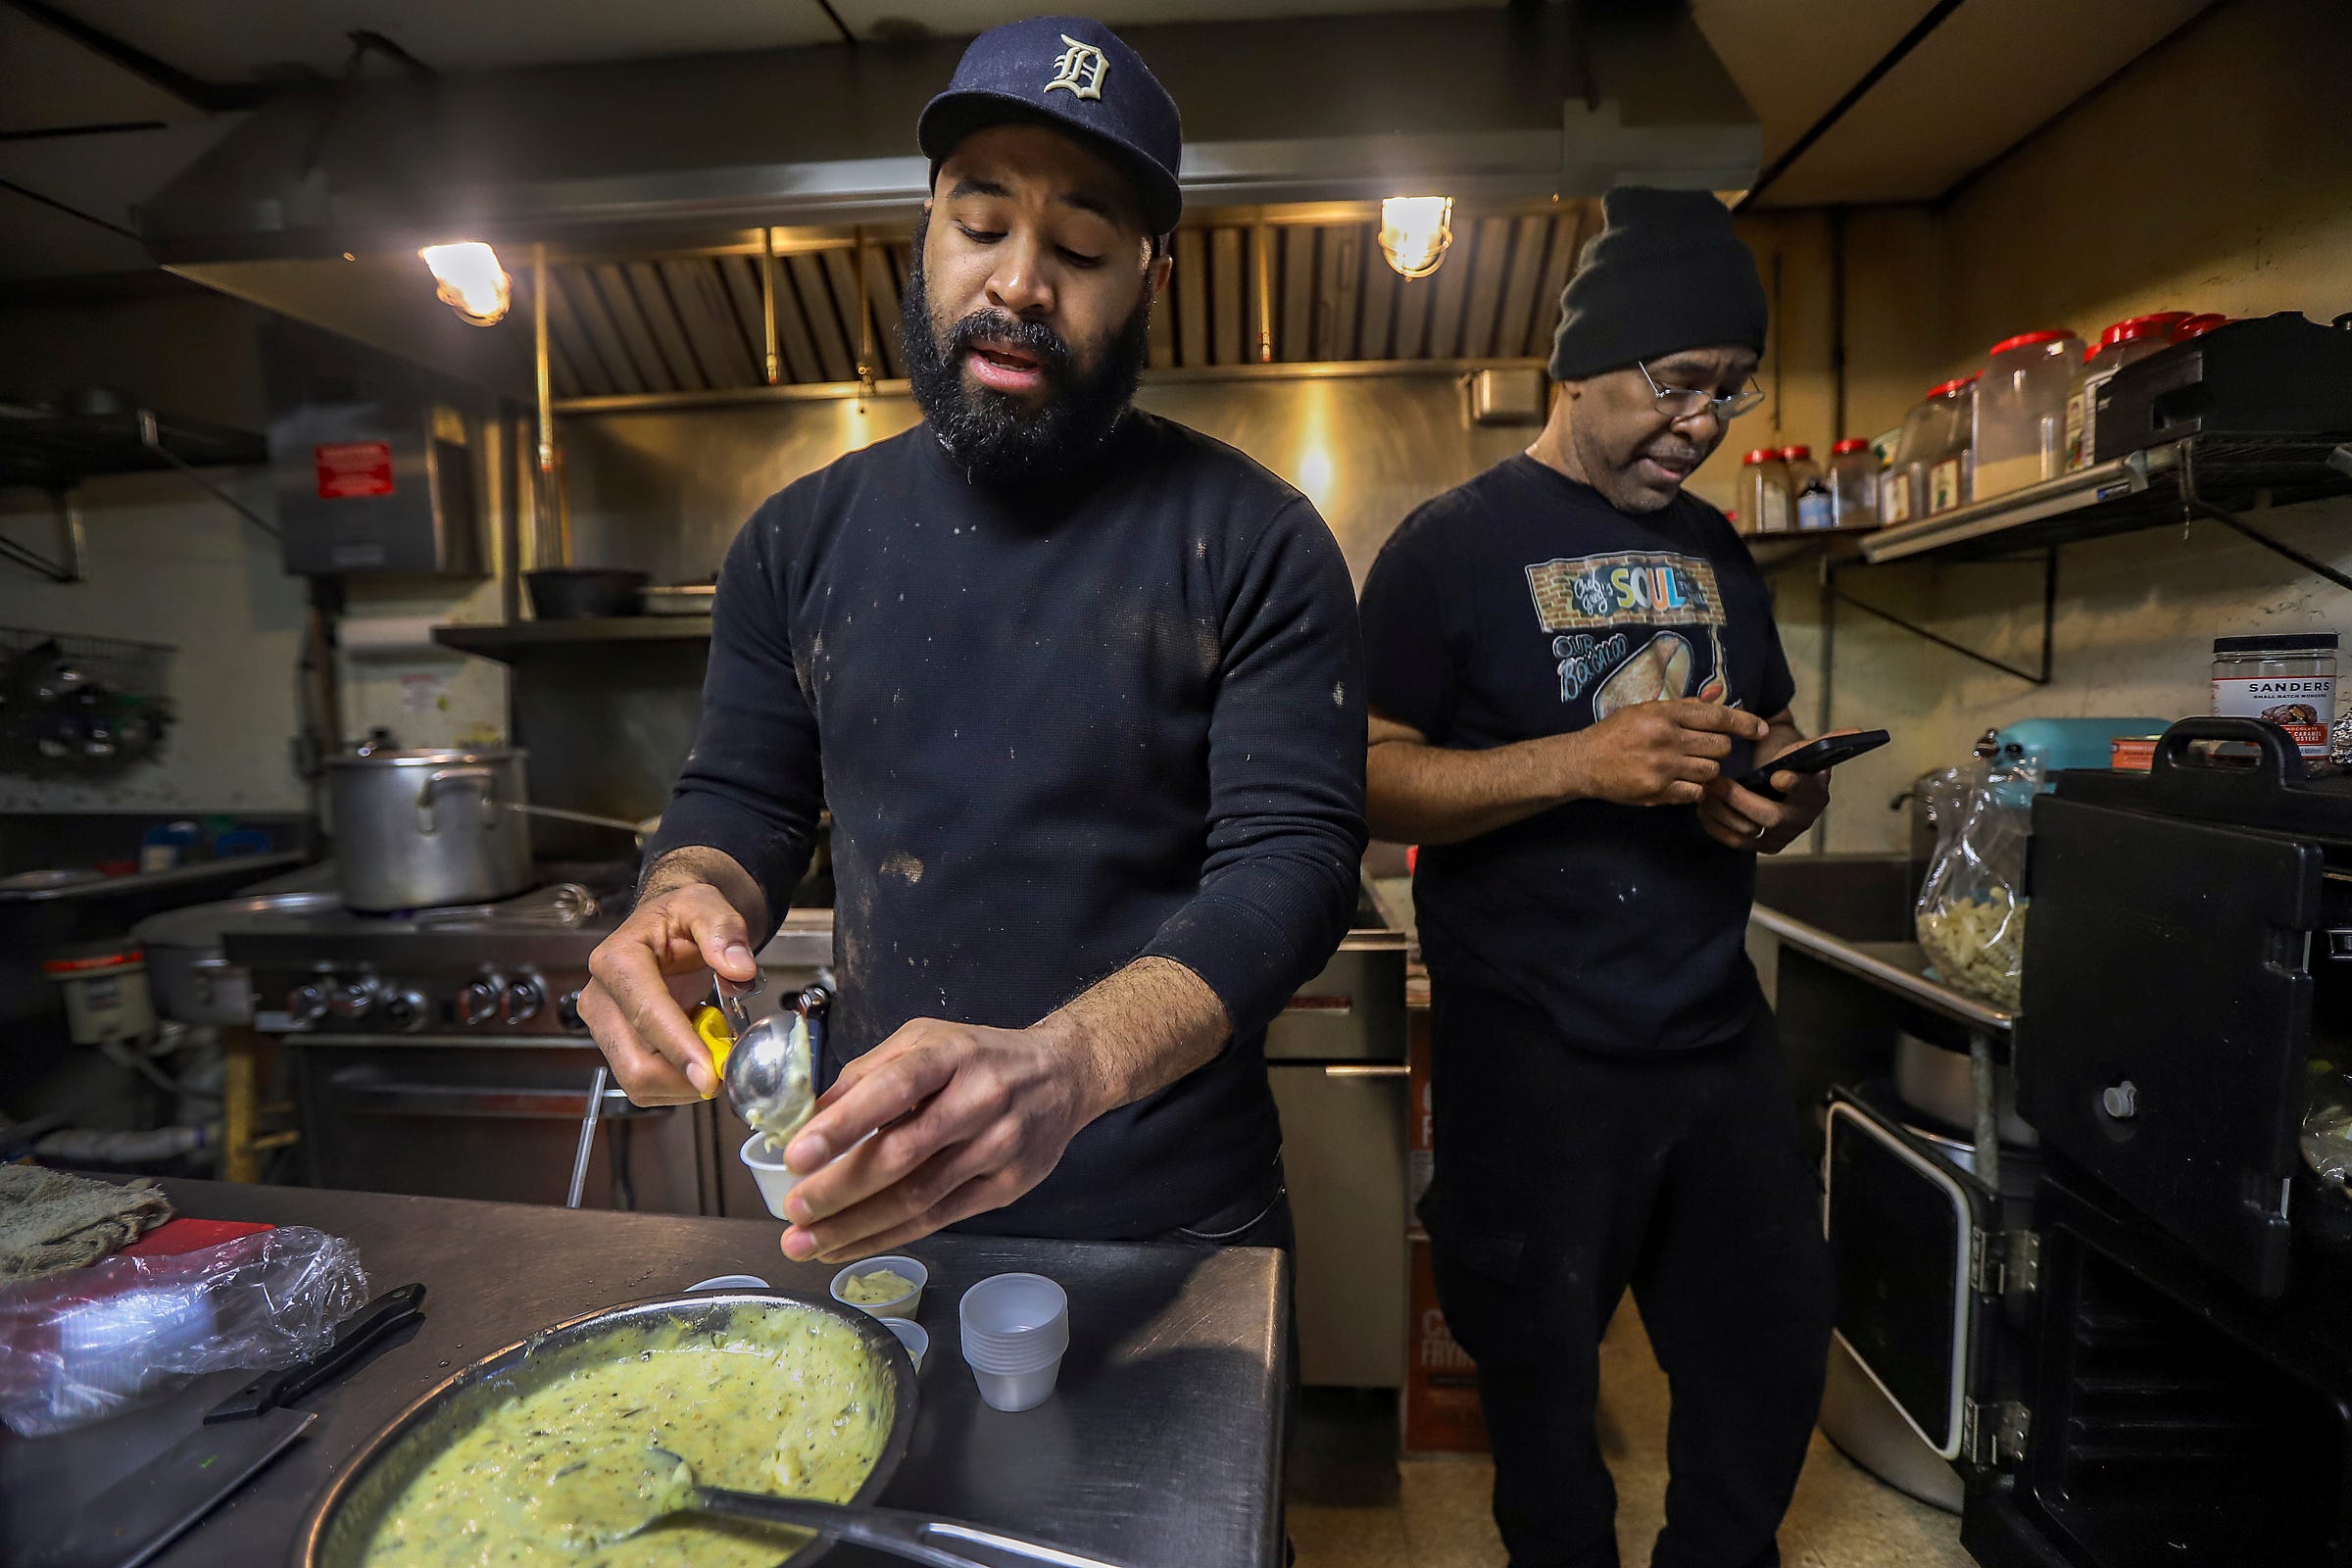 Greg Beard Jr., 36, of Detroit, works with his father, Chef Greg Beard, 62, of Detroit, in the kitchen prepping tartar sauce and helping make his famous, 14-ingredient Boogaloo sauce at Chef Greg's Soul "N" the Wall restaurant in northwest Detroit, on Wednesday, April 3, 2024.